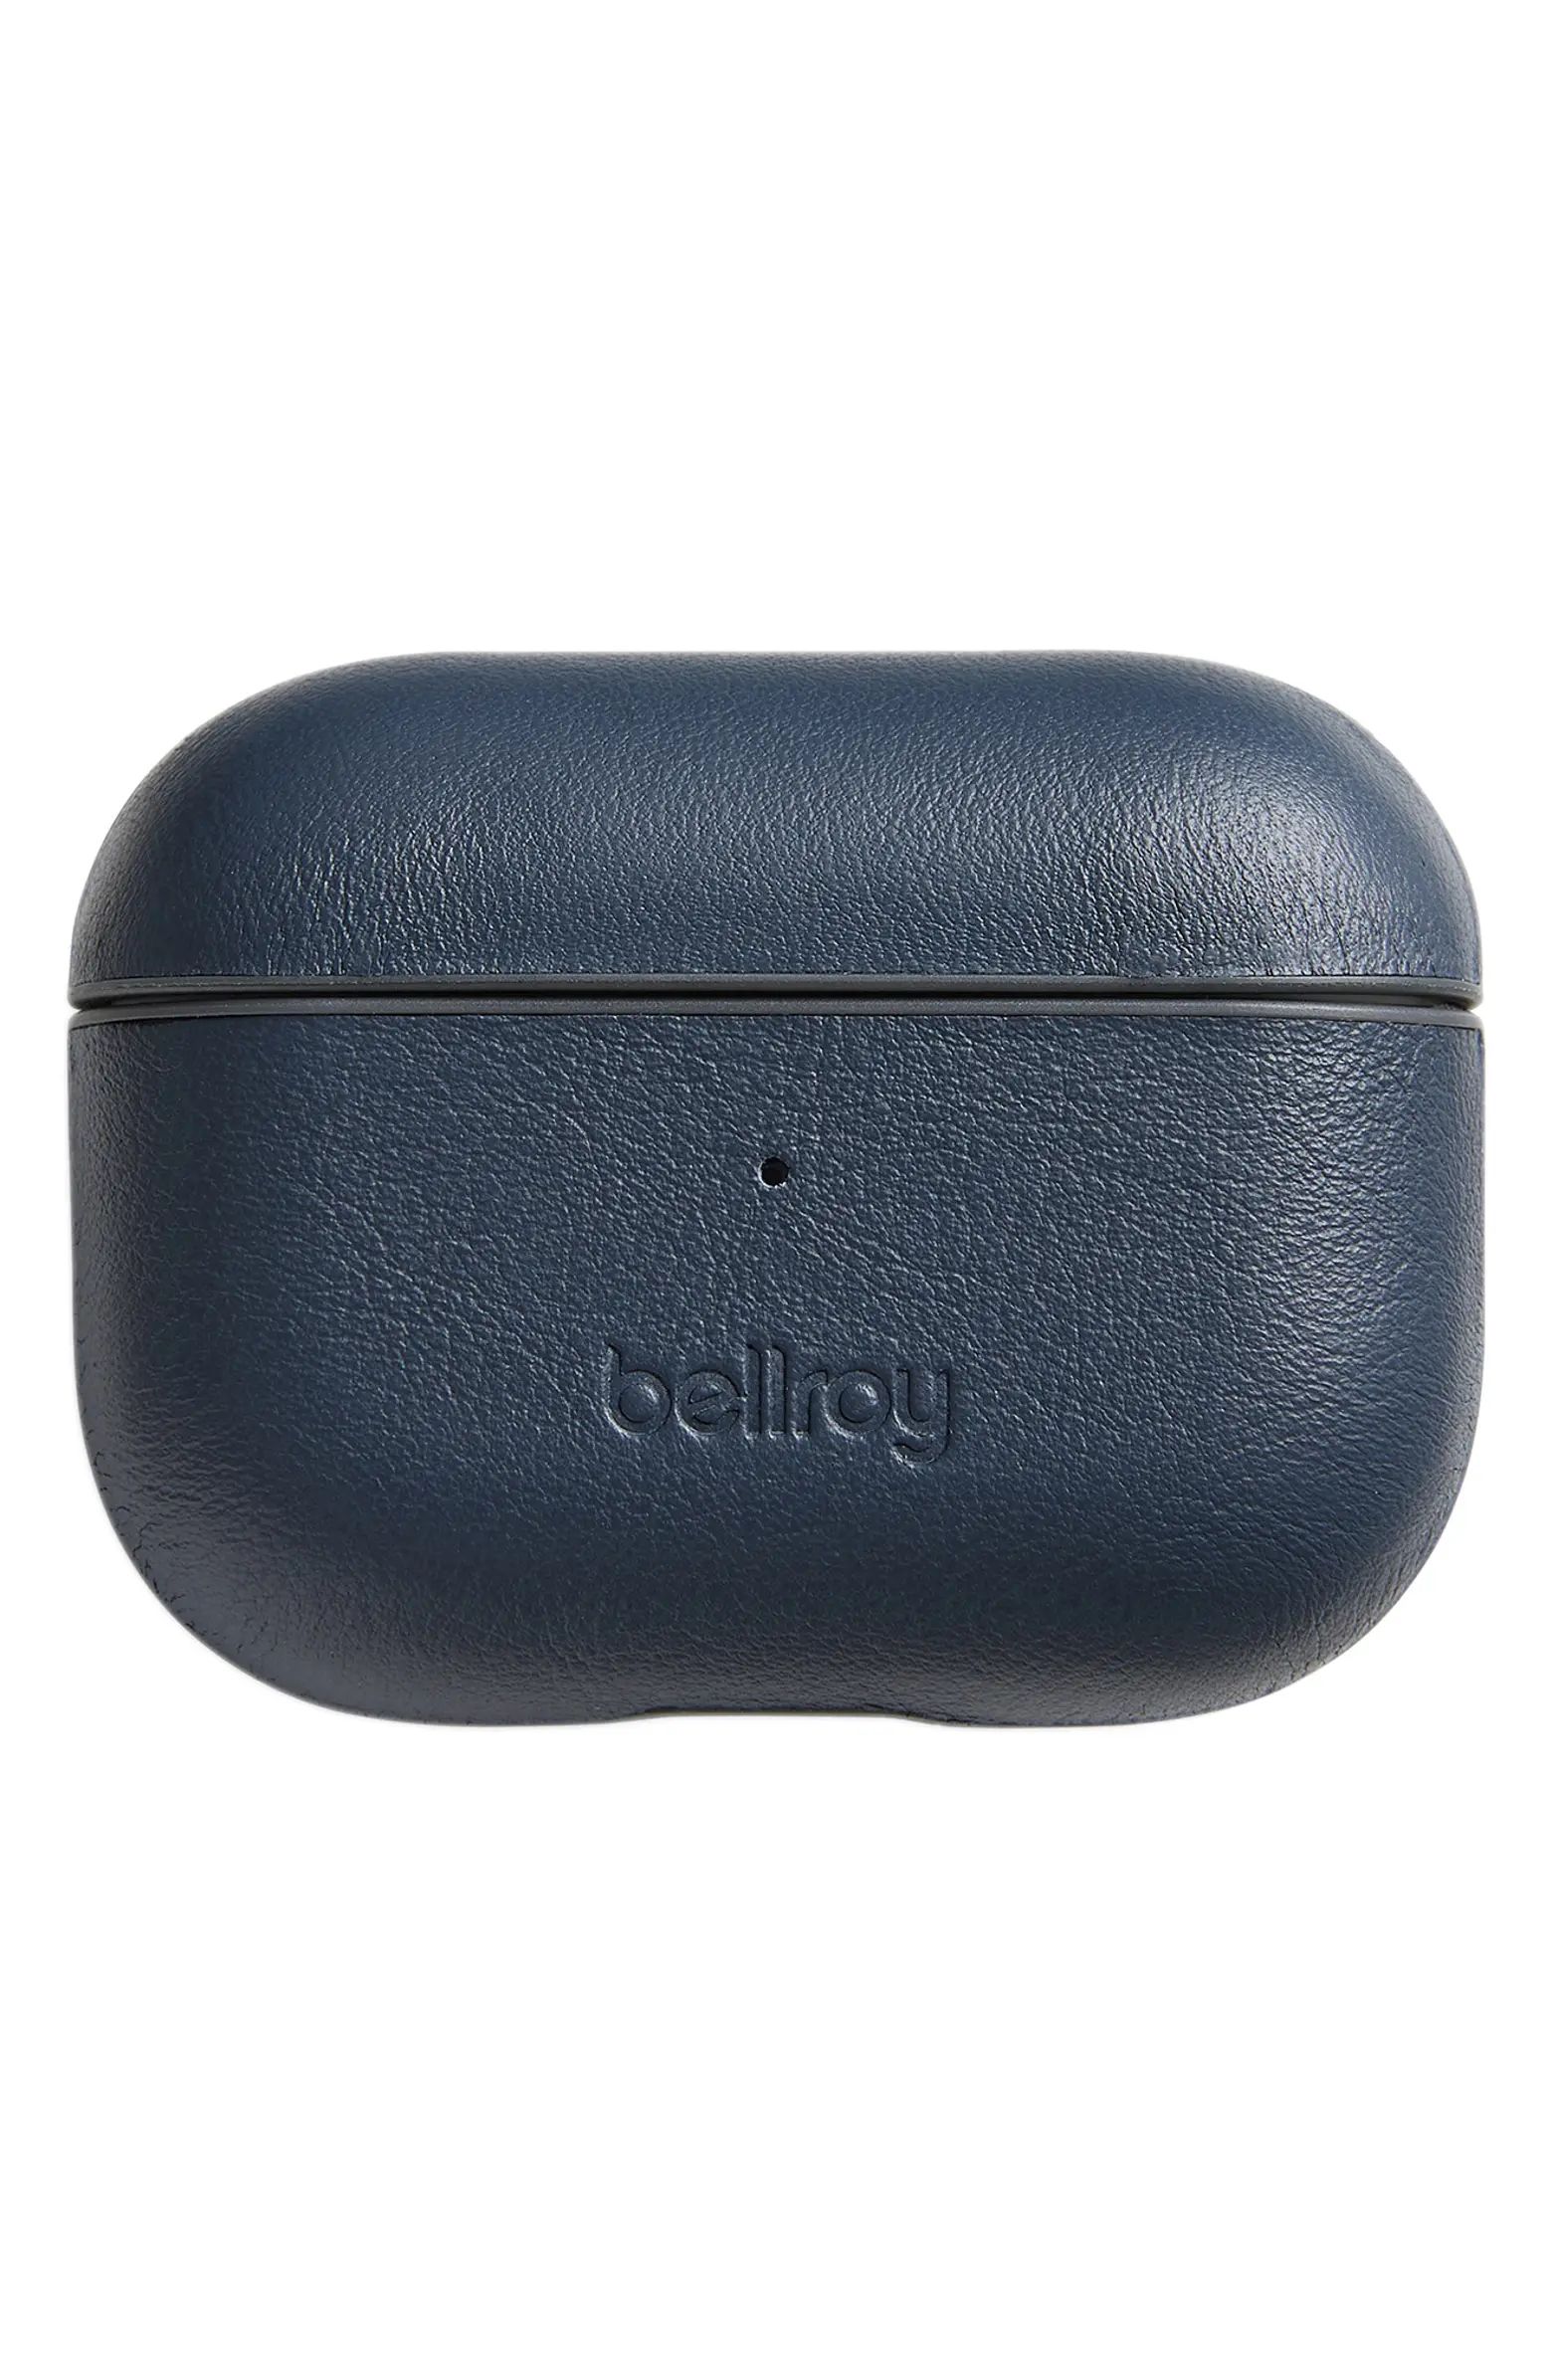 Bellroy AirPod Pro Second Edition Case Jacket | Nordstrom | Nordstrom